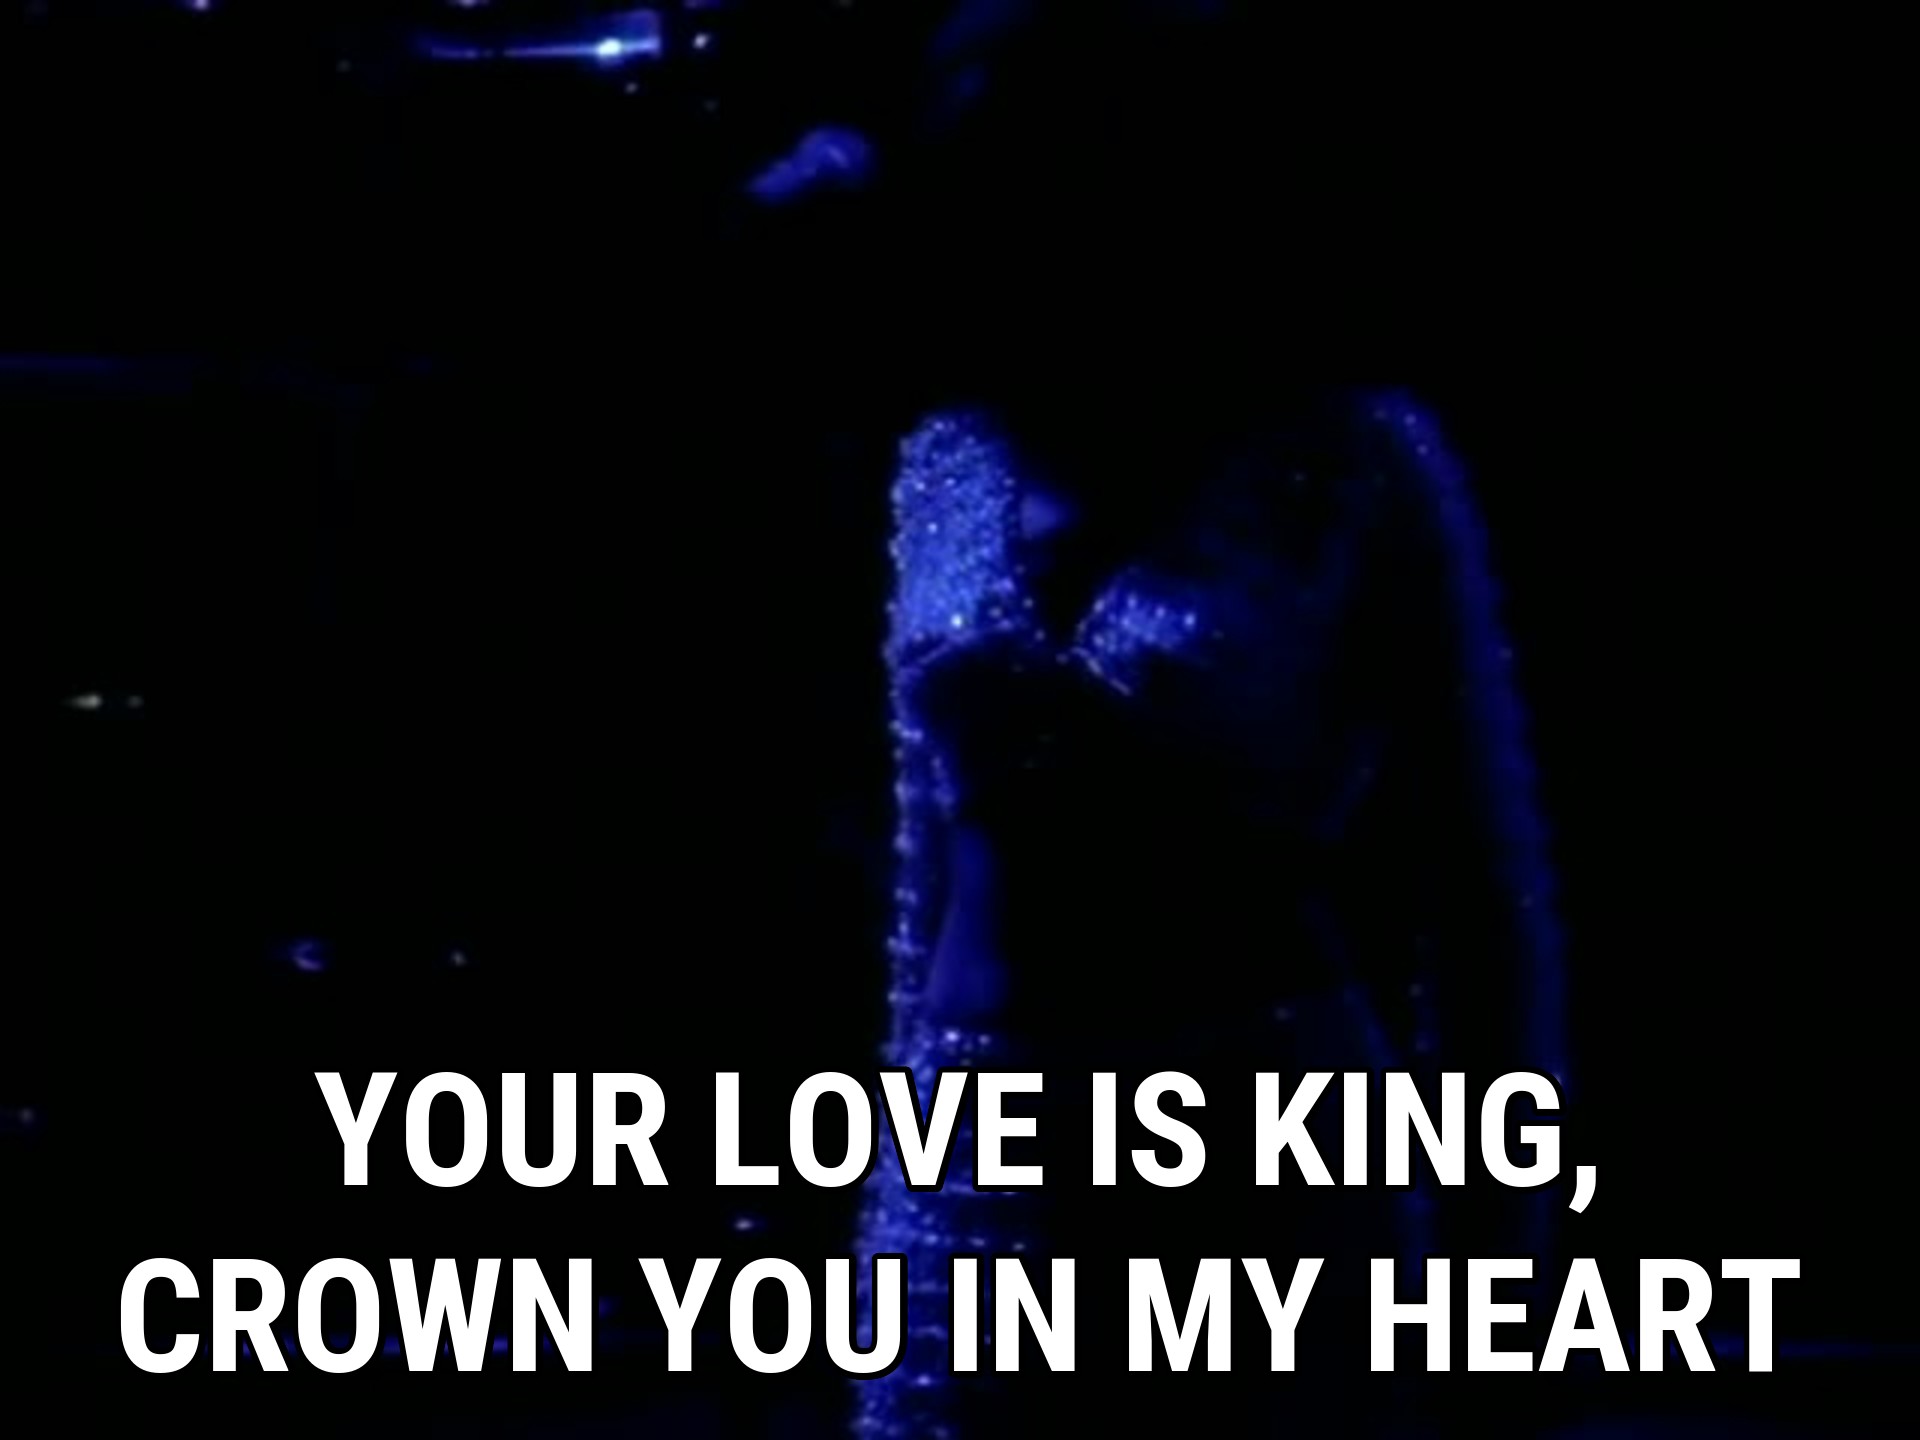 Your Love Is King, Crown You In My Heart / Sade - My Heart Is Your Crown - HD Wallpaper 